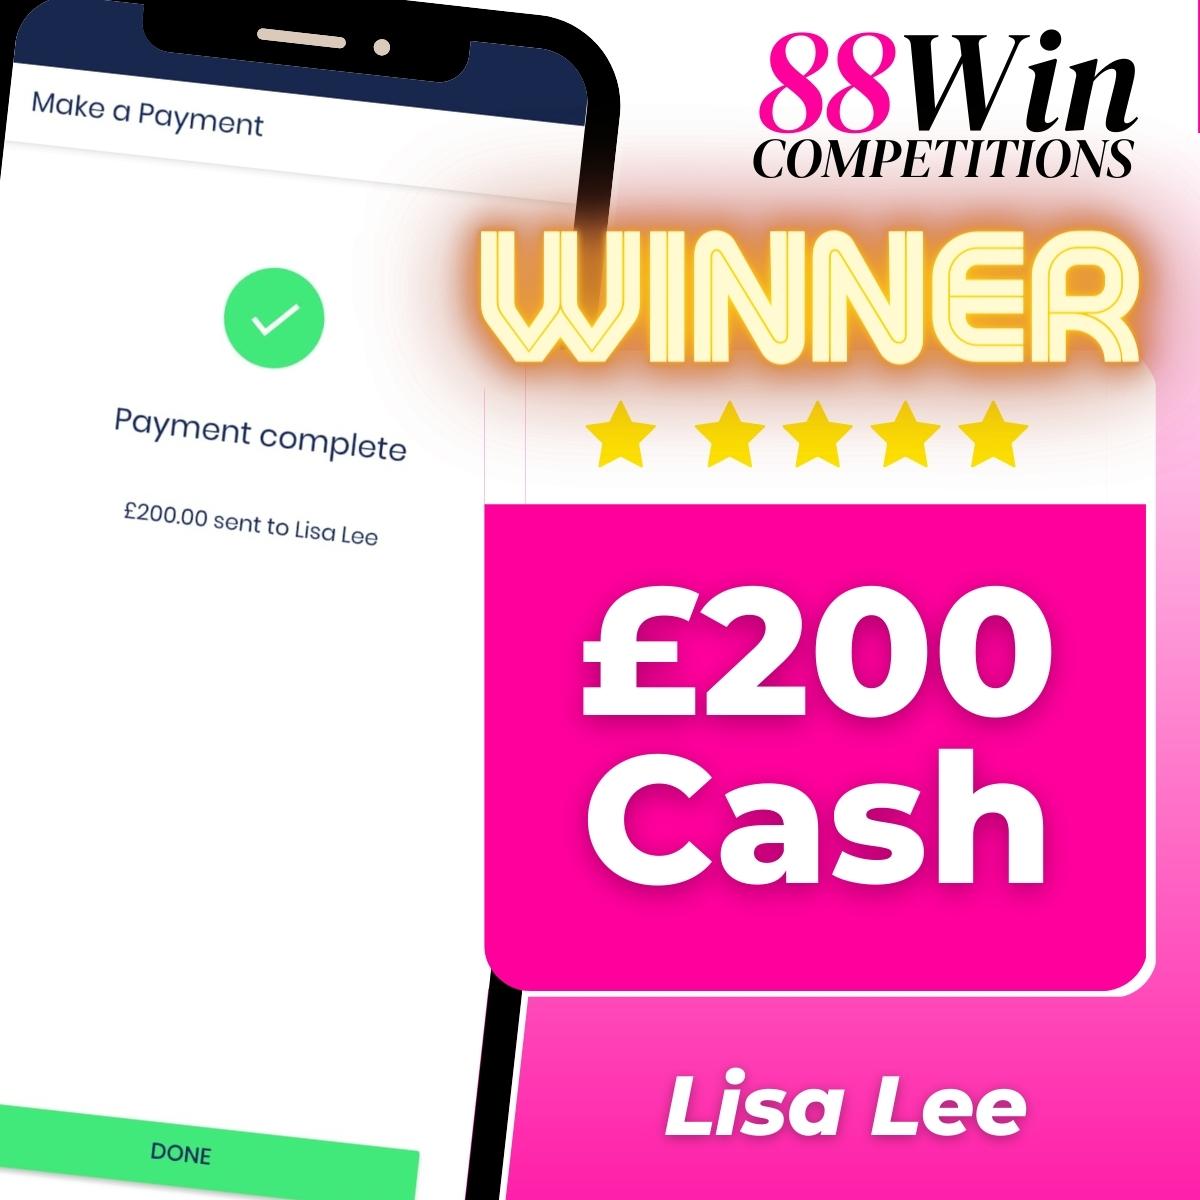 88Win Competitions Winner Photo £200 Cash